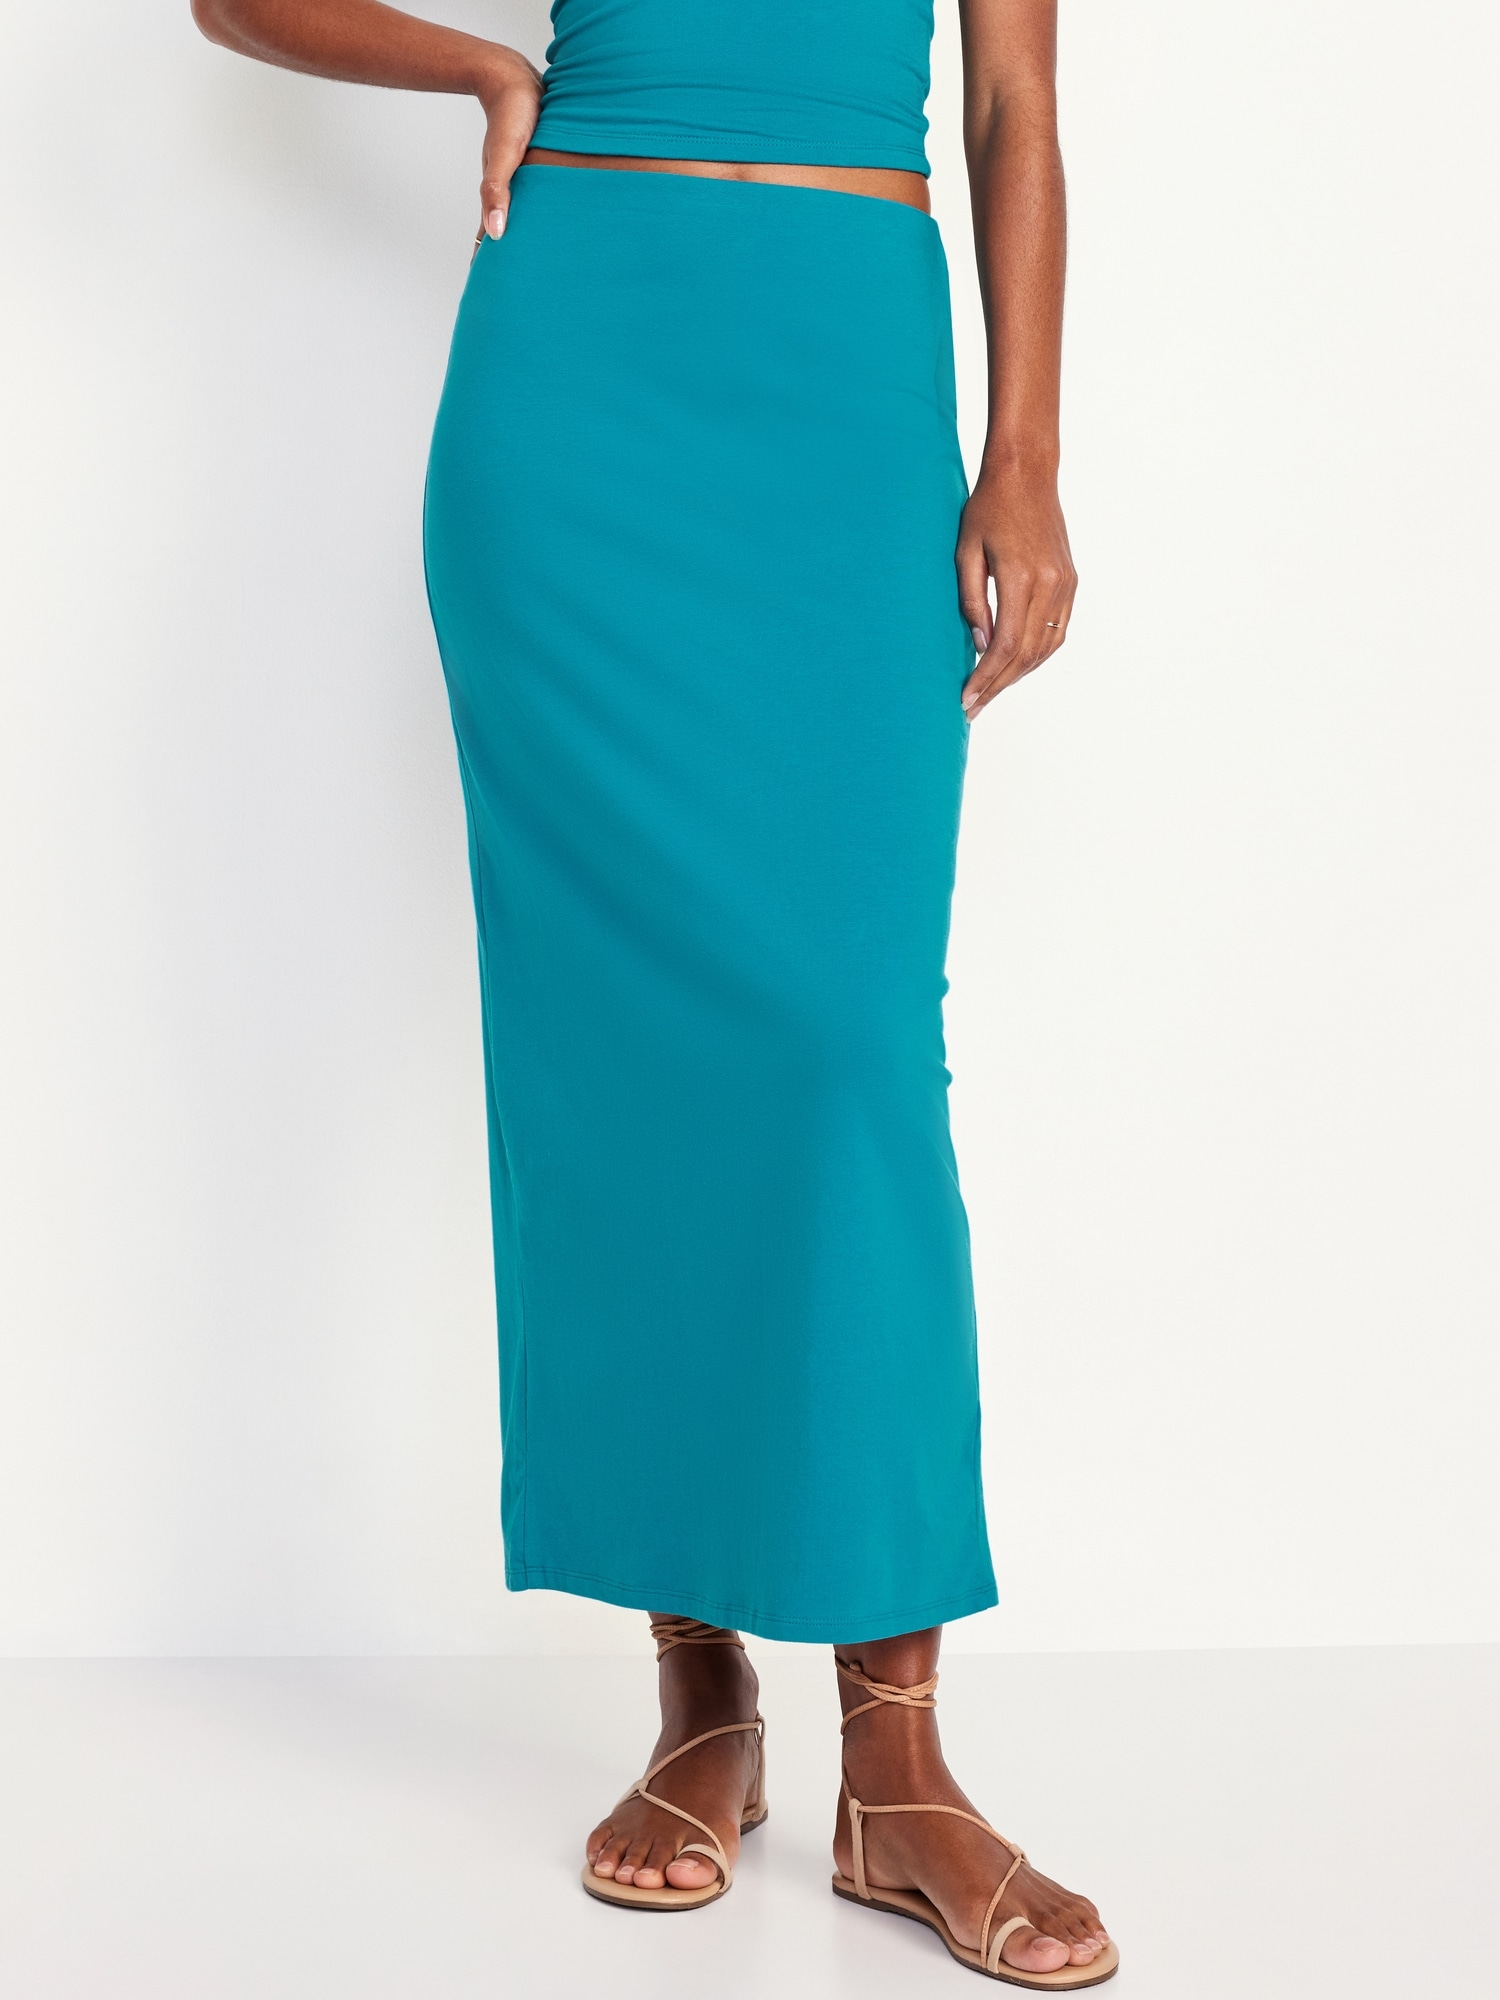 Fitted Maxi Skirt